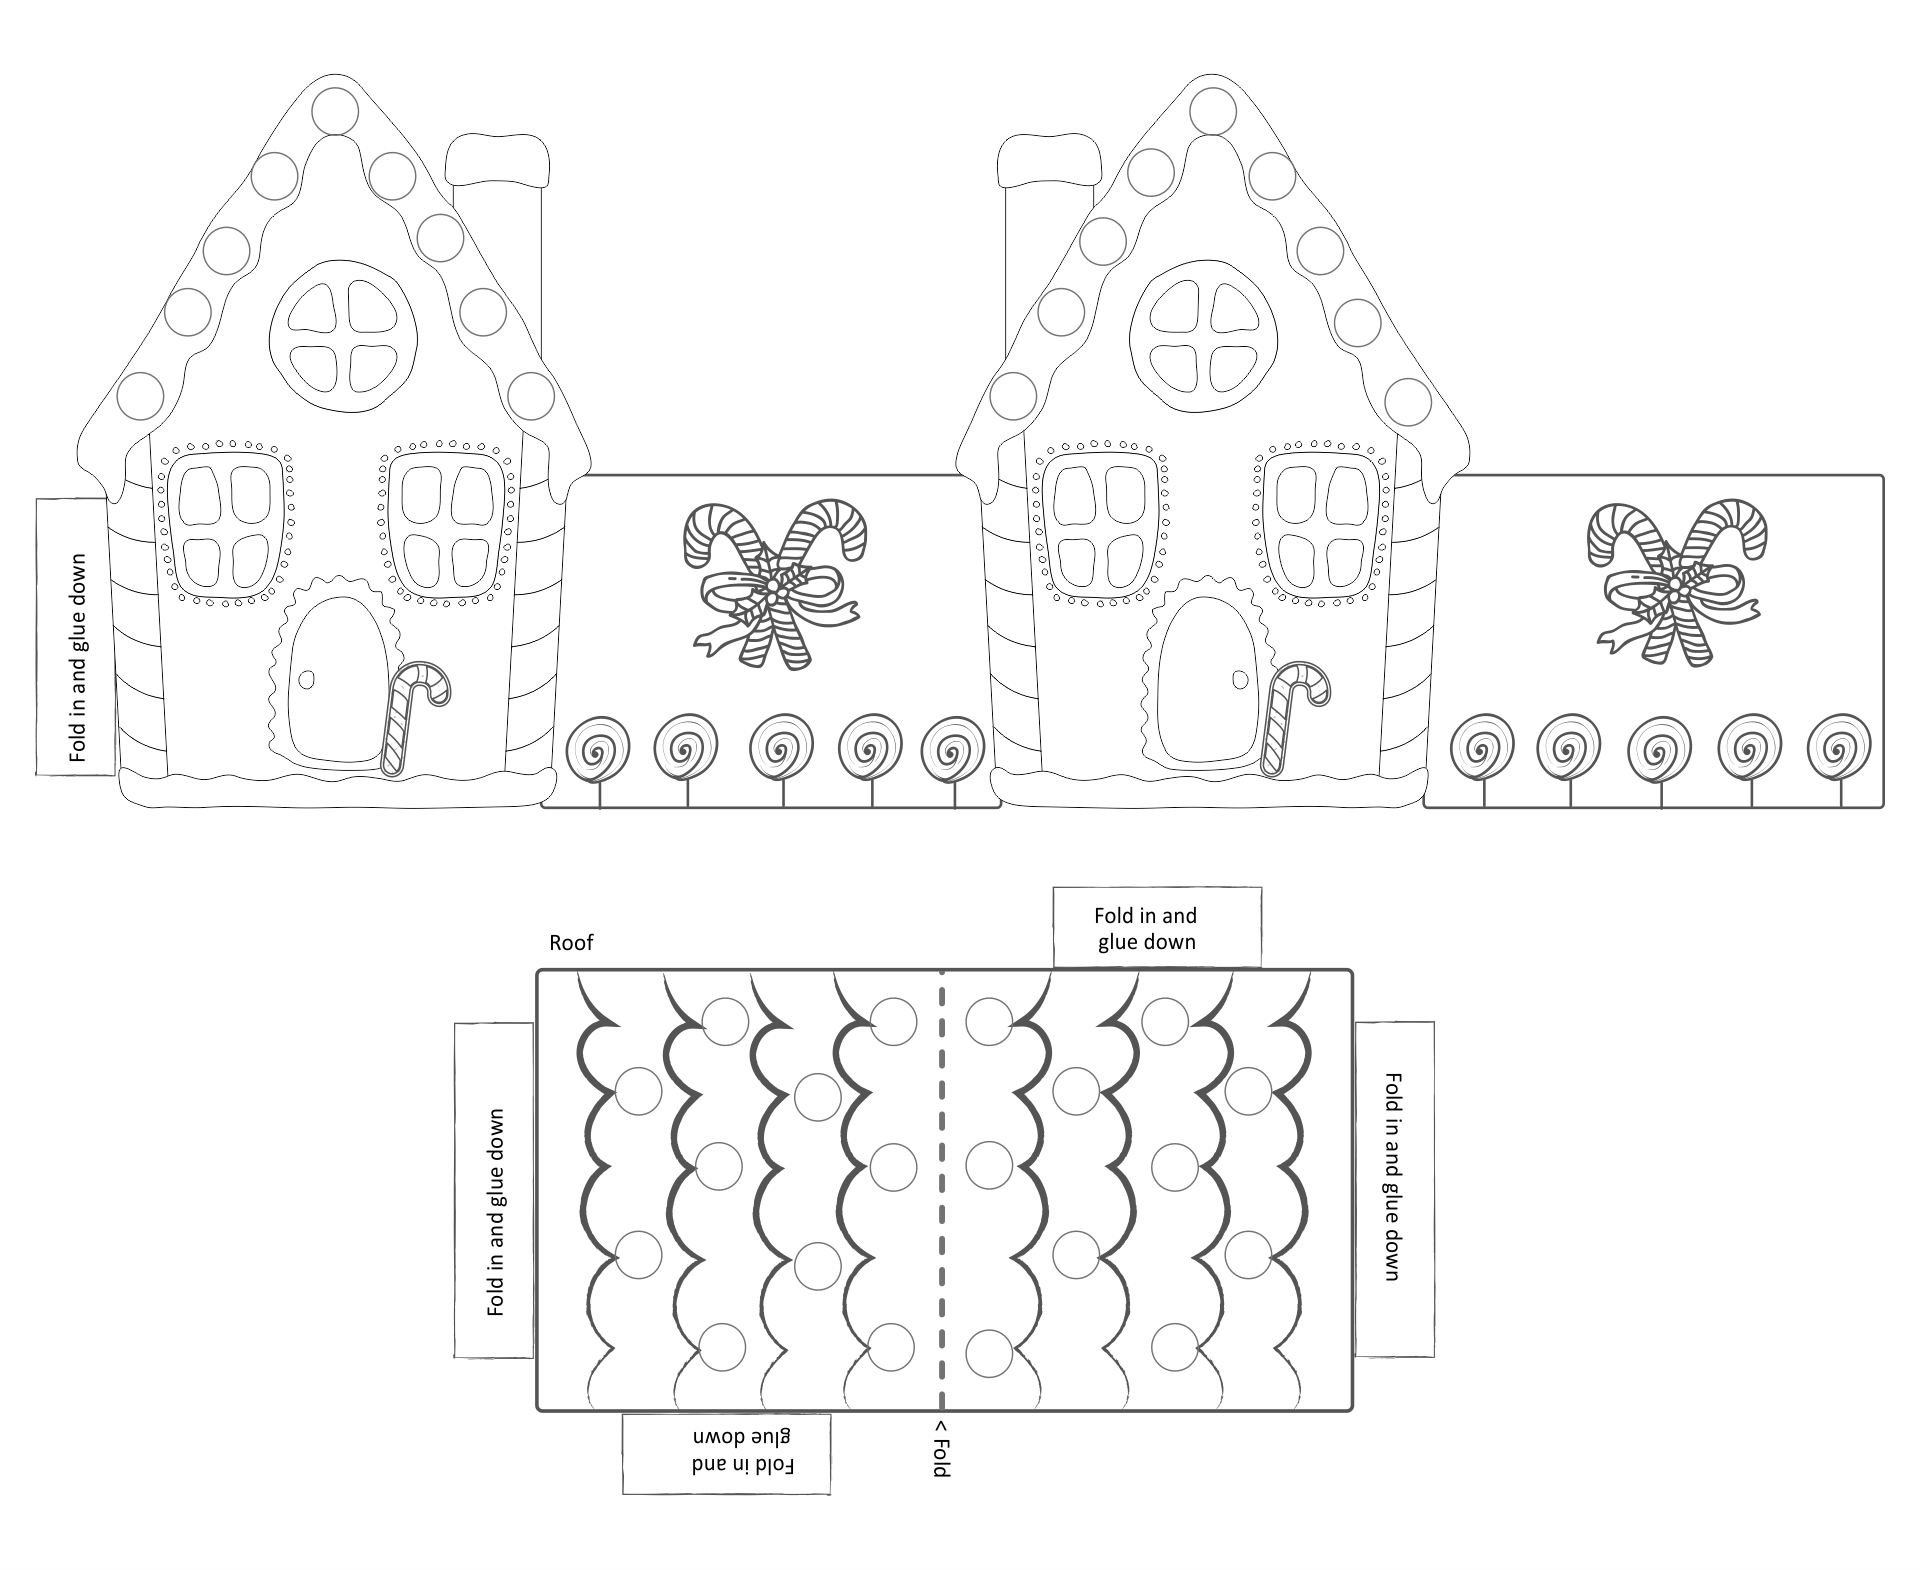 Paper Printable Gingerbread House Template